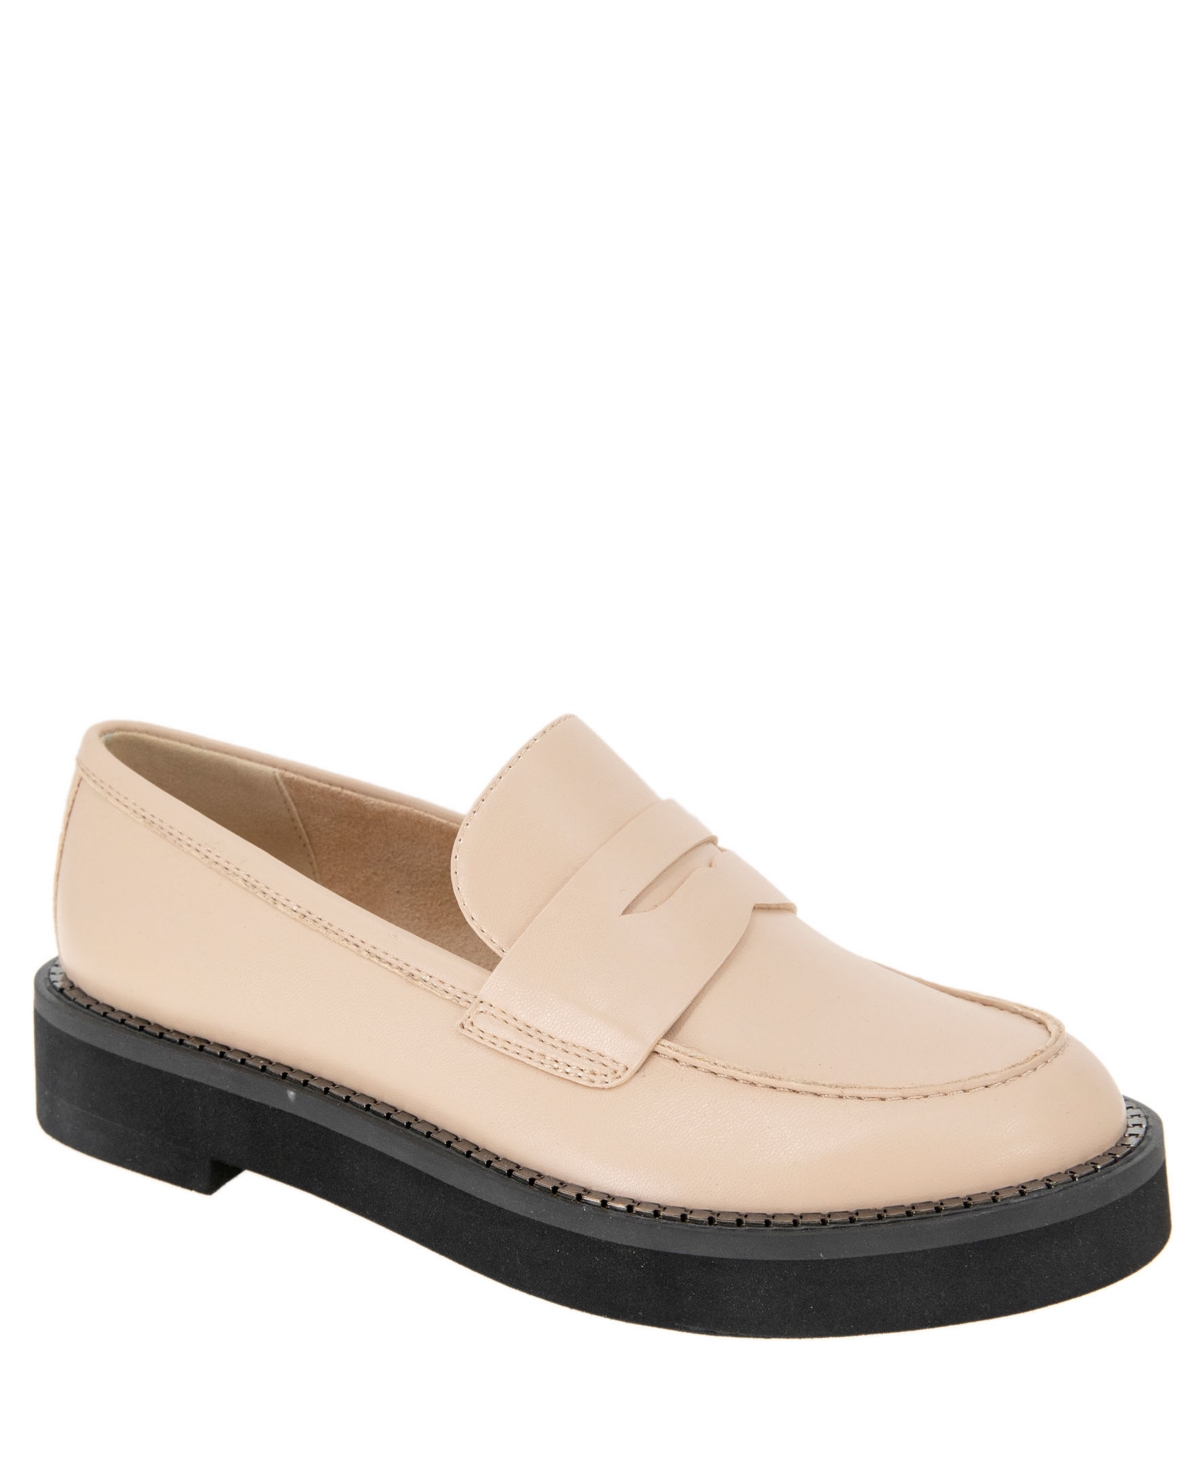 Women's Sabin Penny Loafer - Taupe